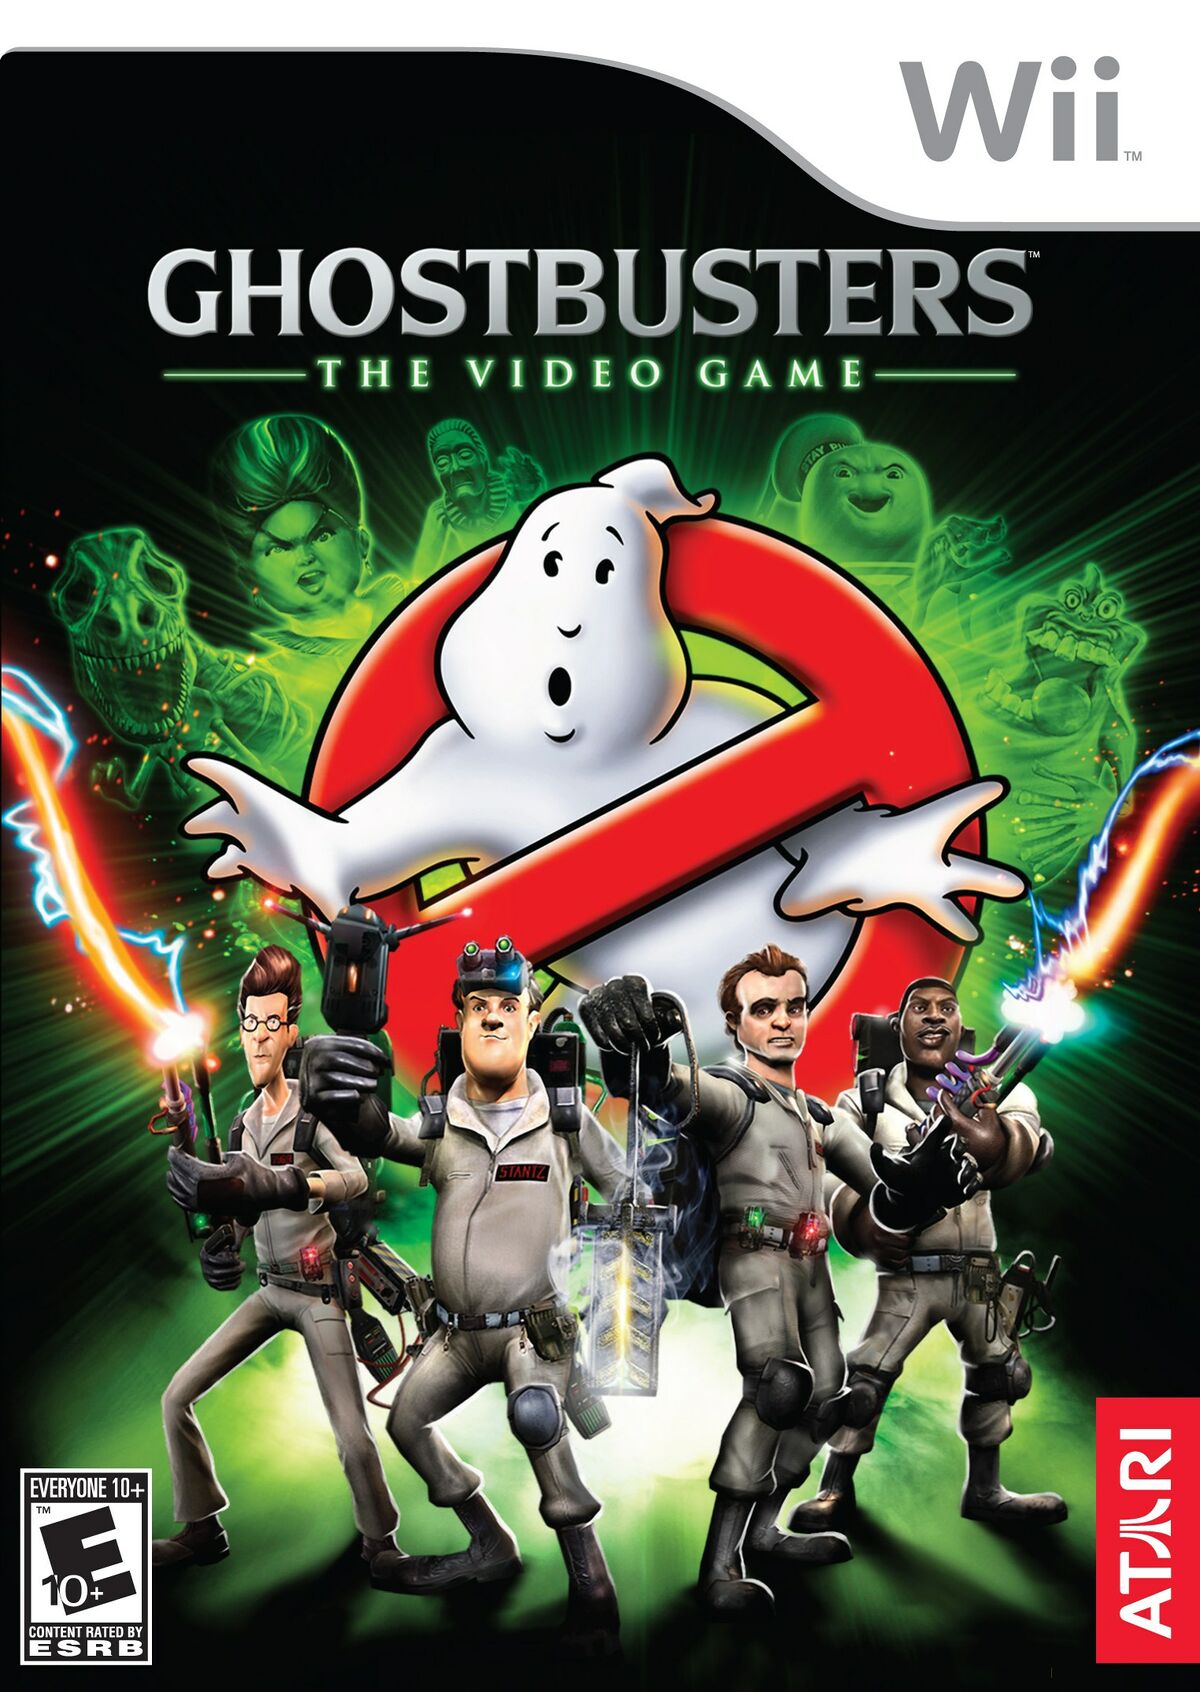 Ghostbusters: The Video Game, Ghostbusters Wiki